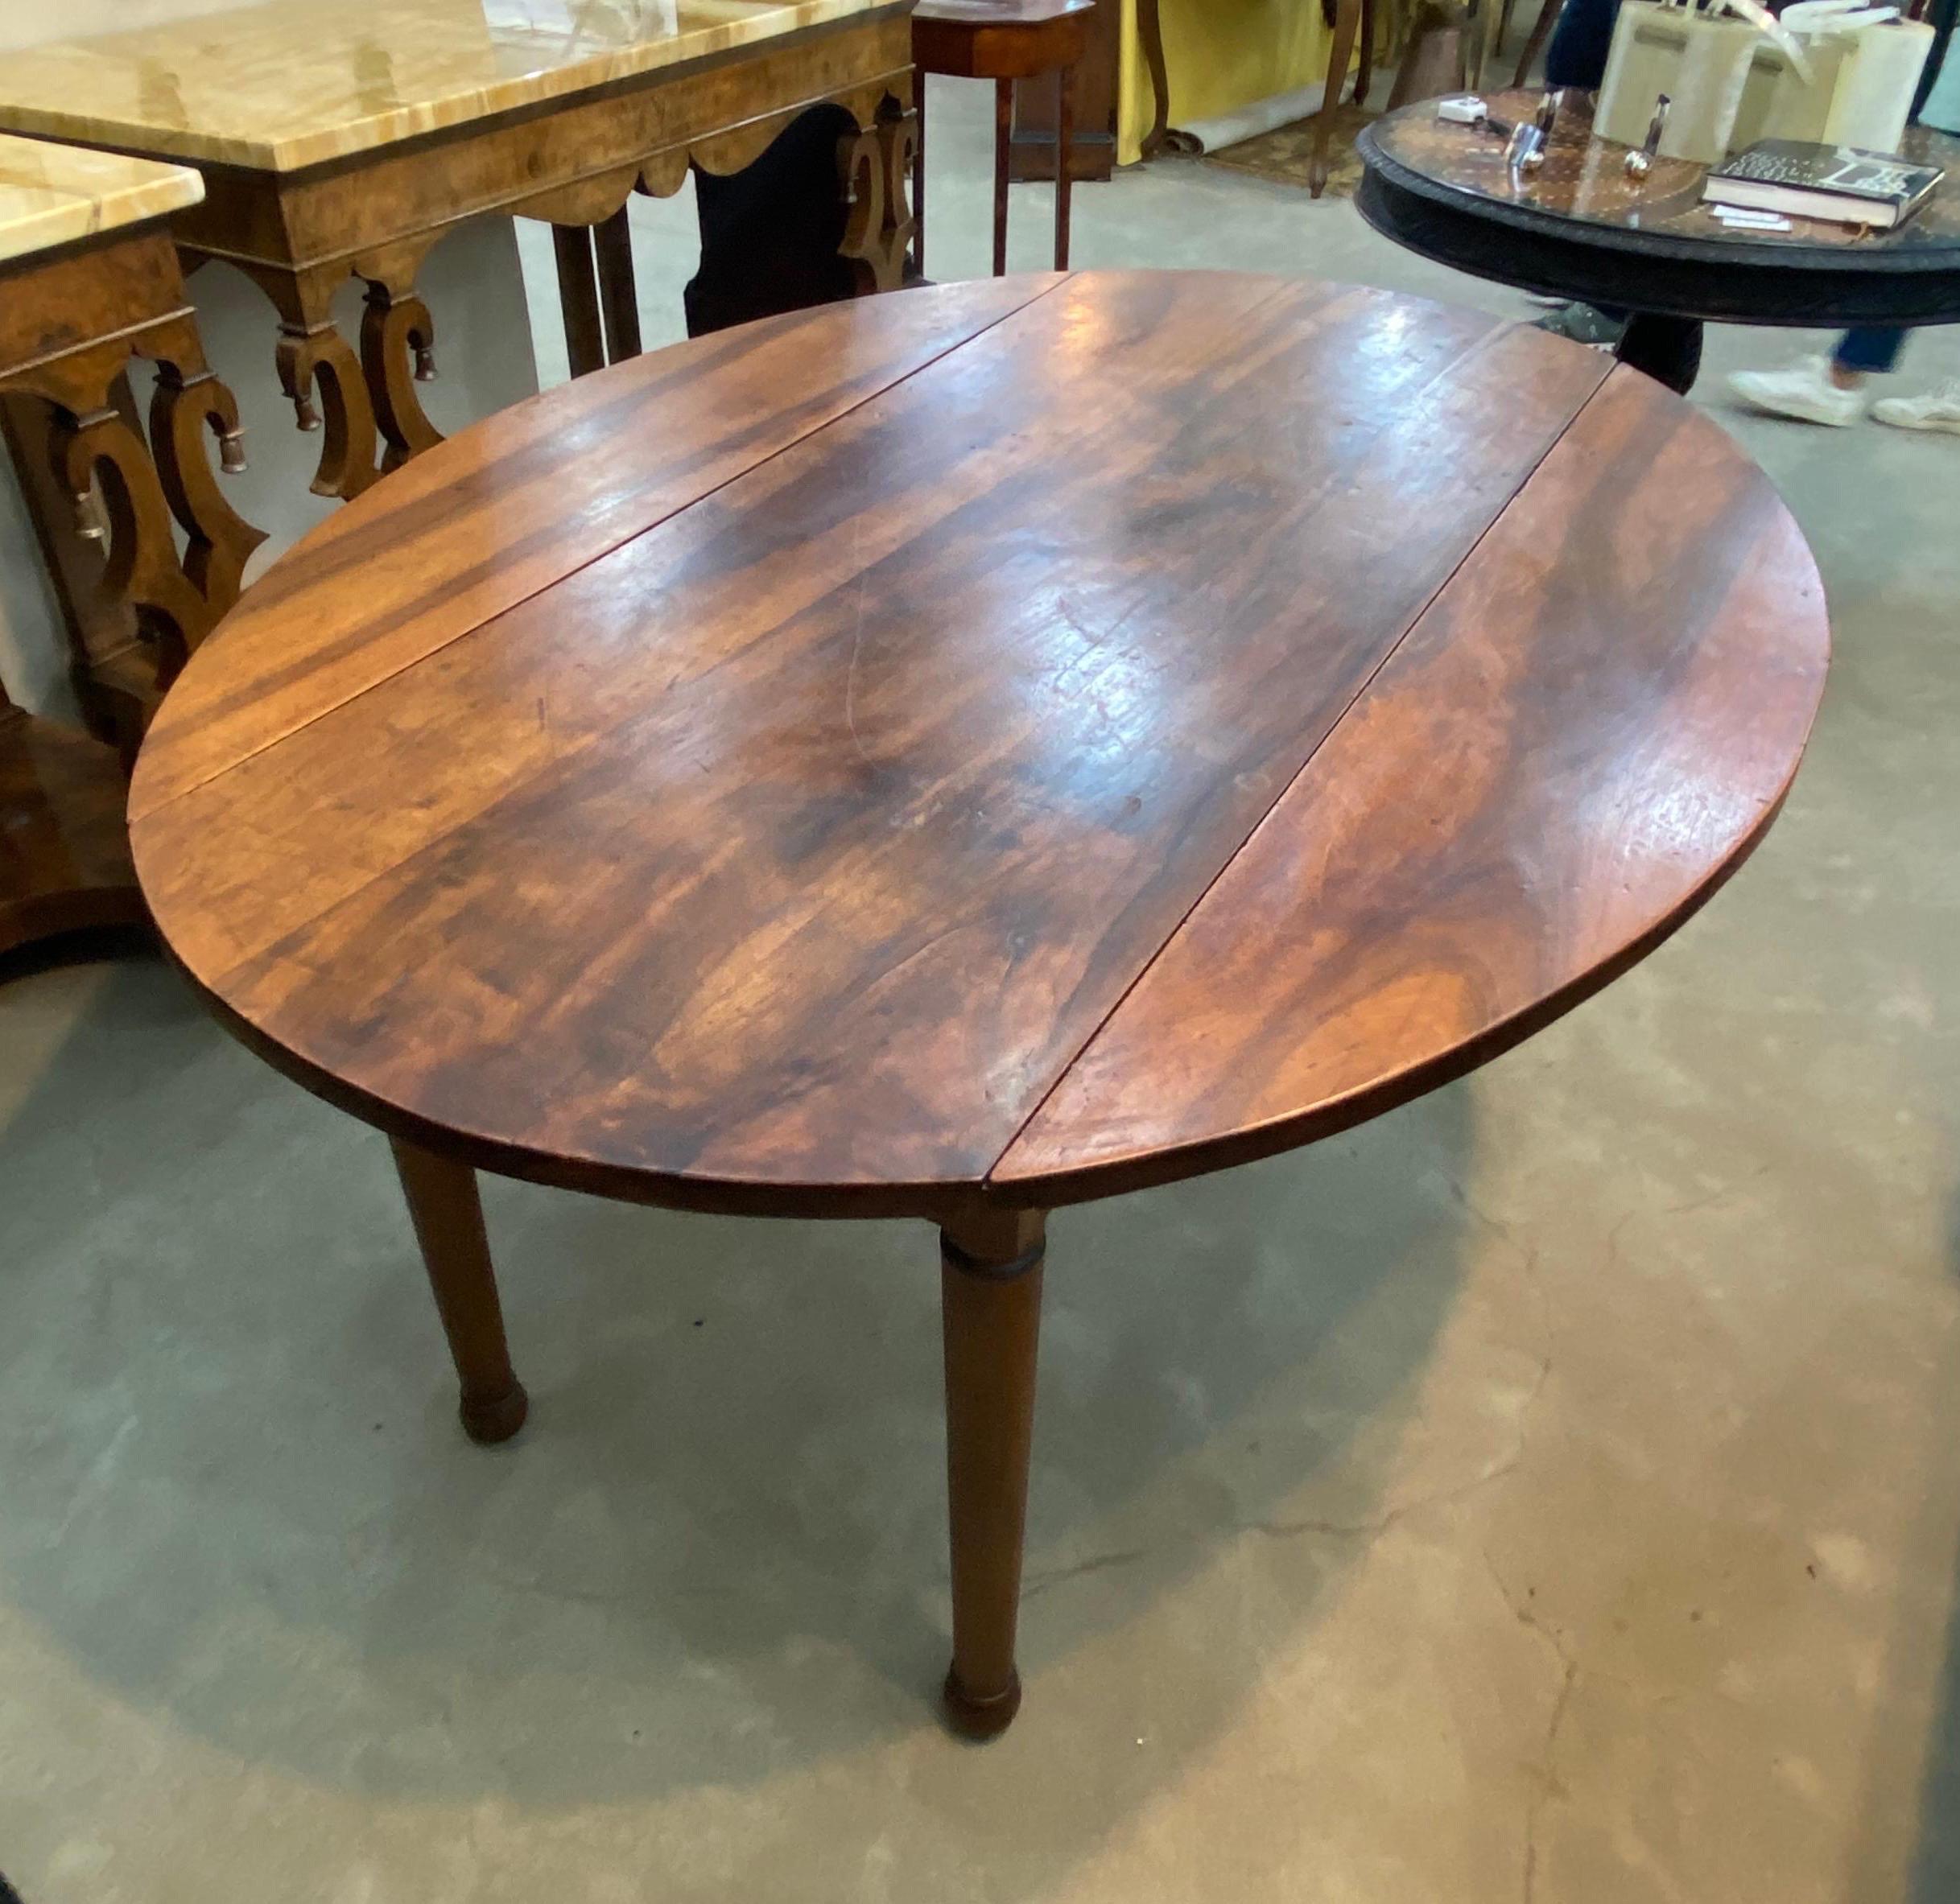 19th century French provincial walnut dining table. Great color and patina. Turned legs, drop leaf form.